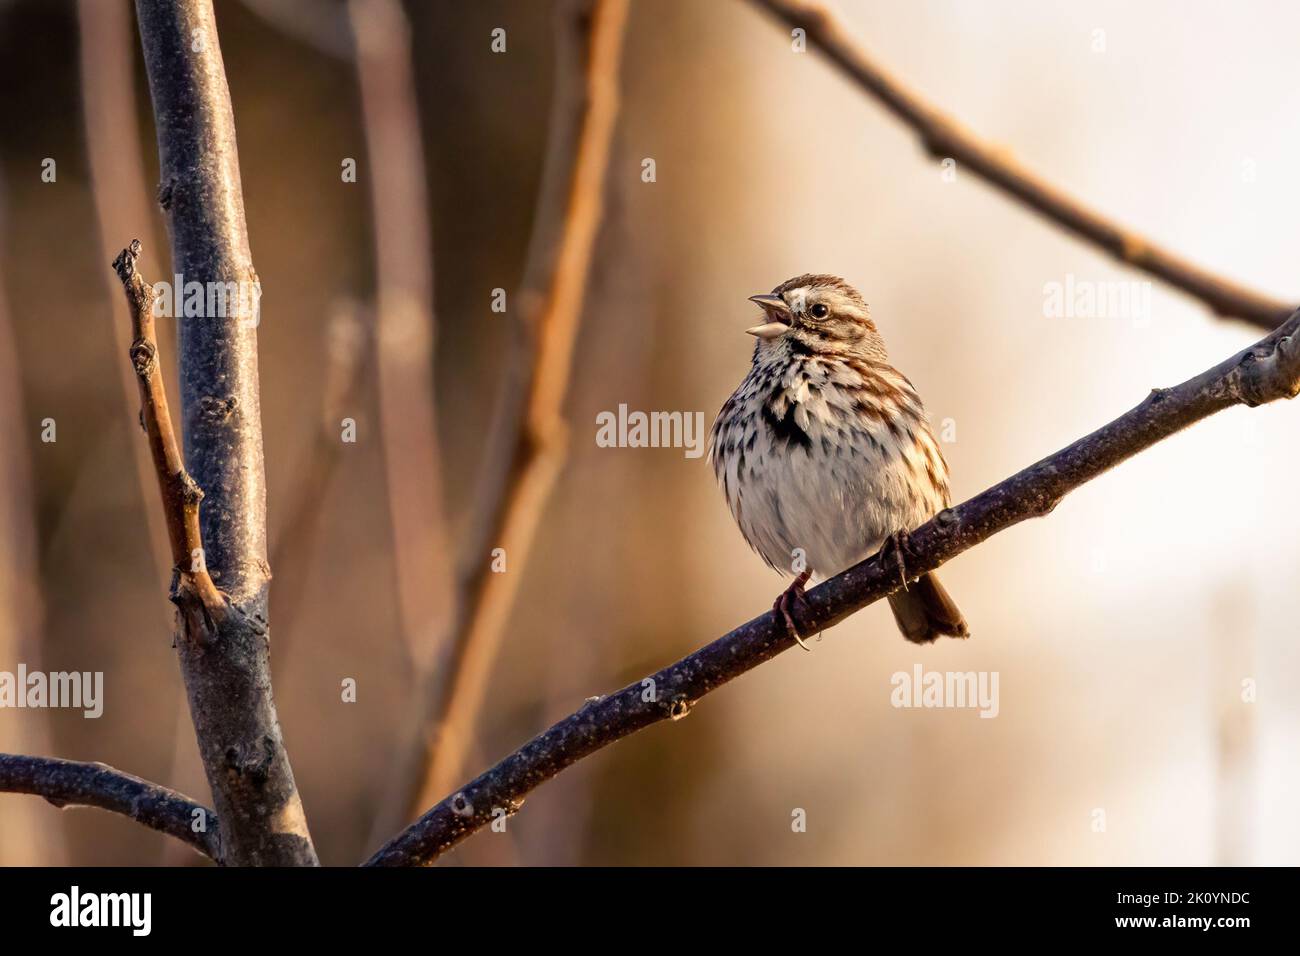 Small song sparrow perched on a branch singing Stock Photo